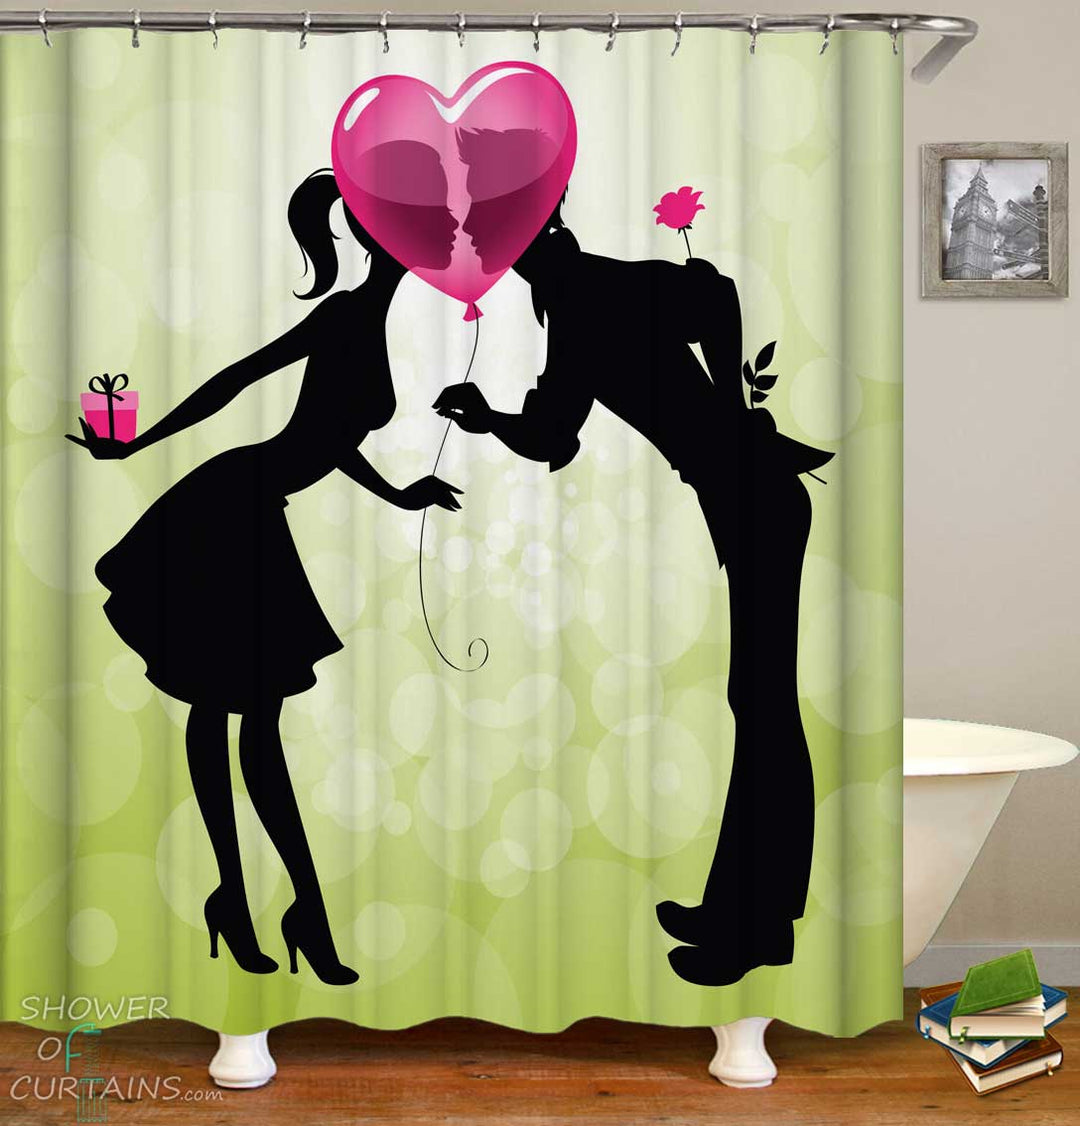 Shower Curtains with Valentine's Day Lovers’ Kiss